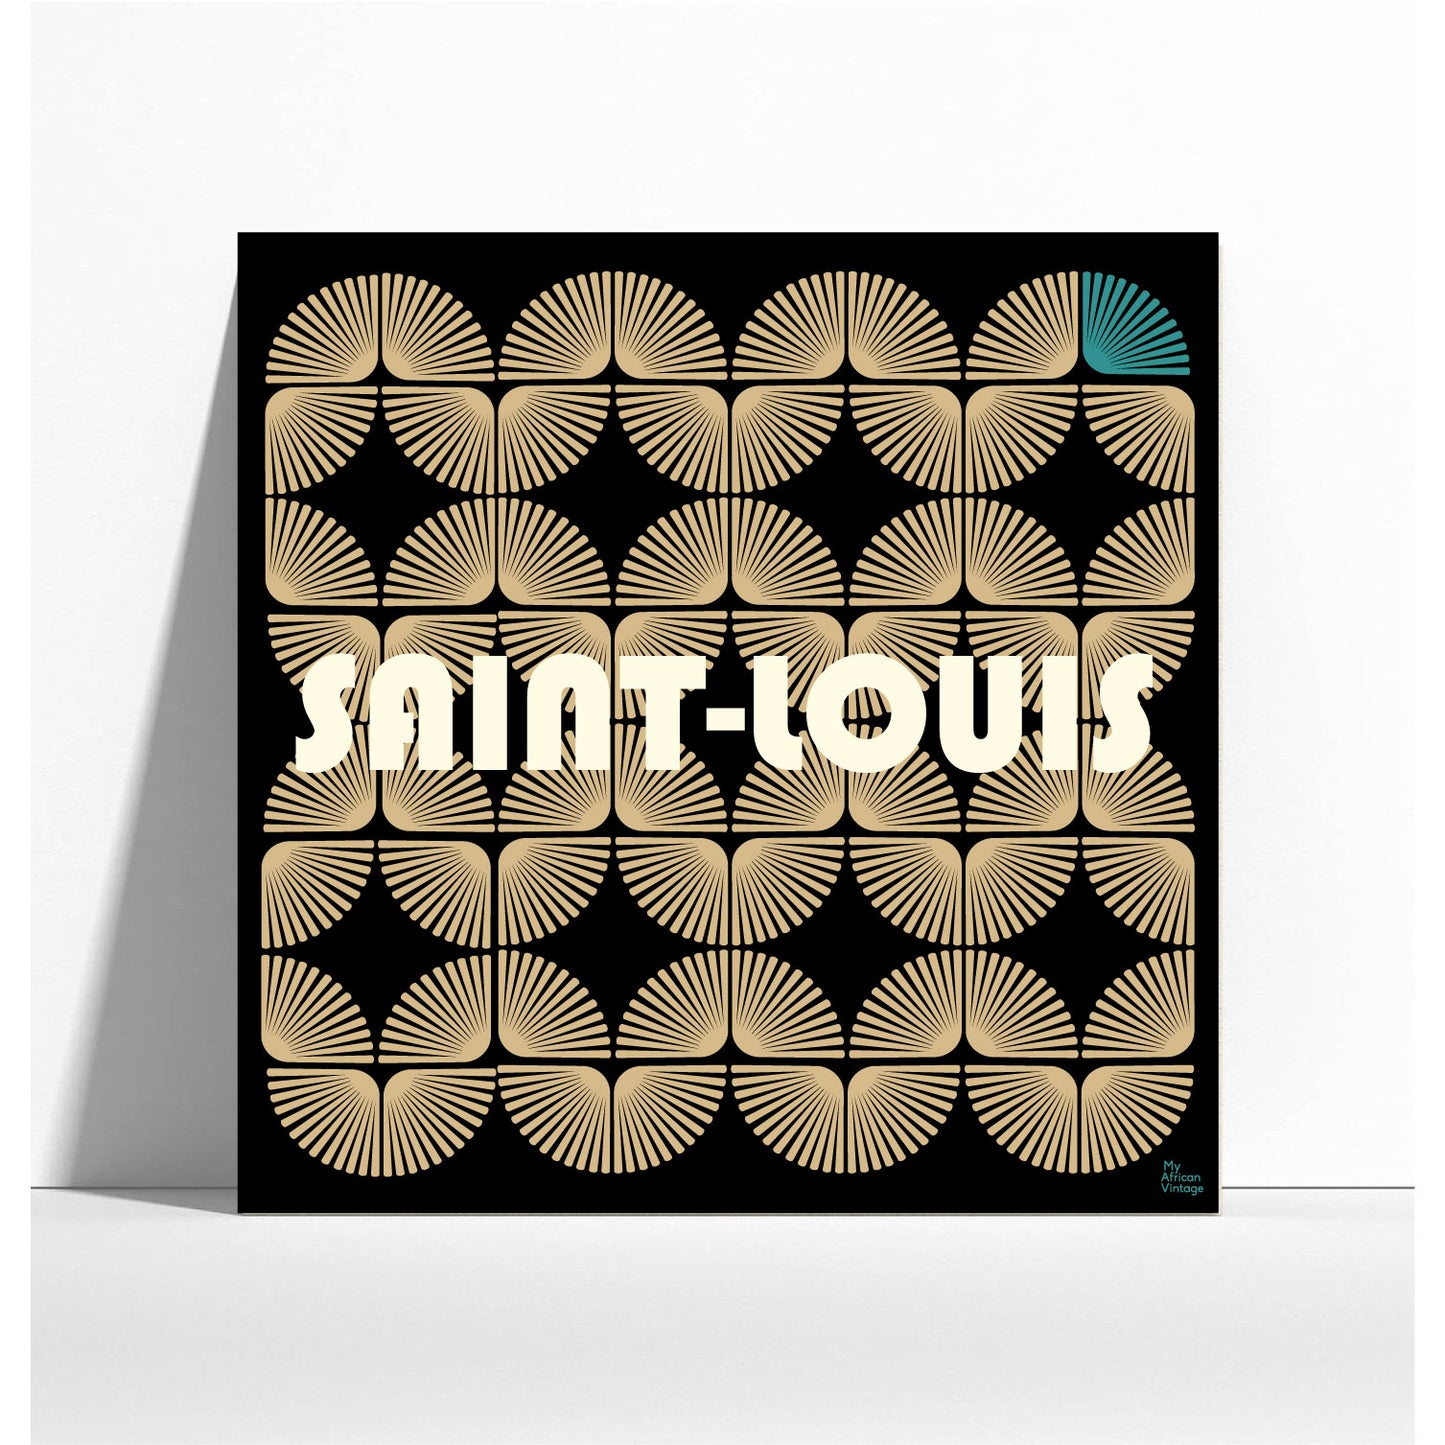 "Saint-Louis" retro style poster - "My African Vintage" collection